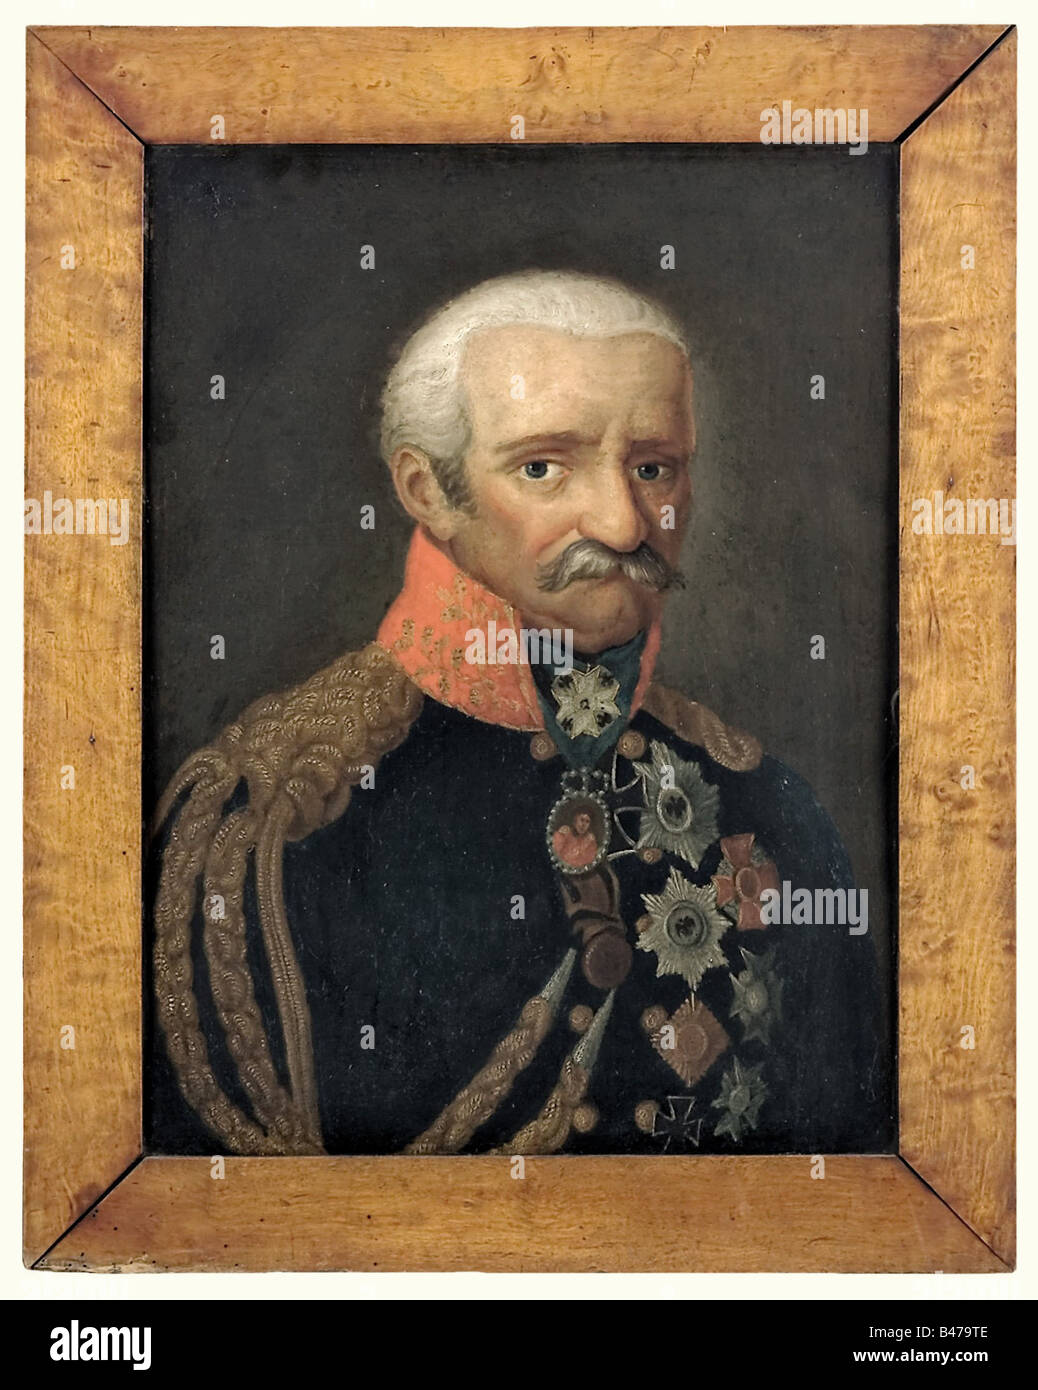 Gebhard Leberecht von Blücher, Count of Wahlstatt, a portrait, 1st quarter of the 19th century Oil on wood. The field marshal wearing a uniform adorned with all his military decorations and facing the observer. In a beautiful, contemporary frame. Size of the picture 44 x 60 cm, framed 57 x 72 cm. An affectionate portrait of one of the most famous field marshals in German military history. The naive painting style vividly illustrates the strong admiration for this man, which was already shown to him in his lifetime. people, 19th century, Prussian, Prussia, Germa, Stock Photo